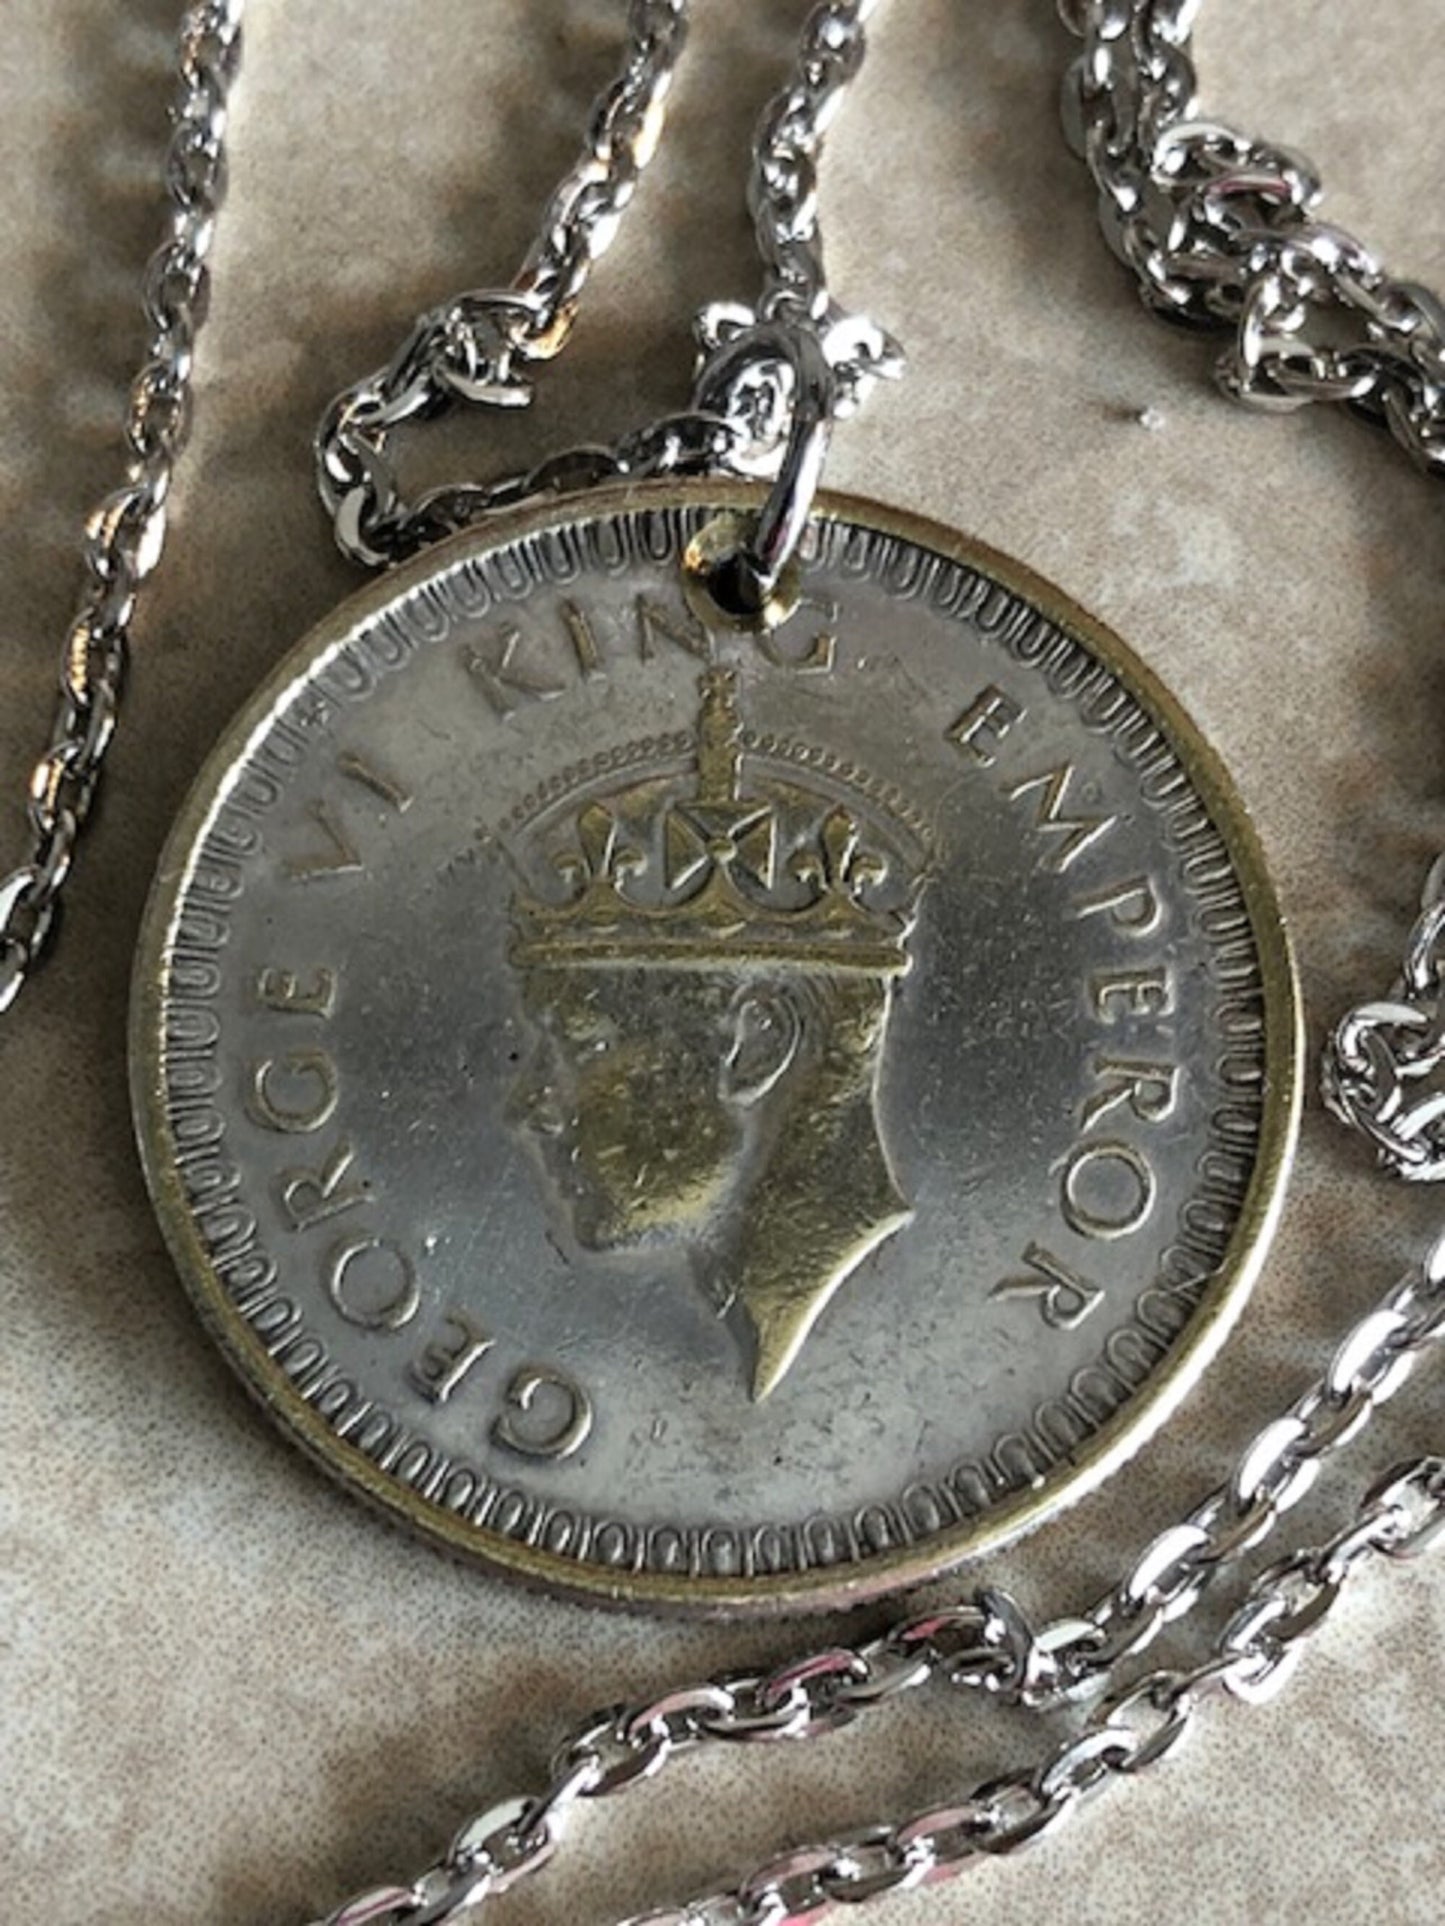 India Coin Pendant East India Replica 1 Rupee 1942 Personal Vintage Handmade Jewelry Gift Friend Charm For Him Her World Coin Collector